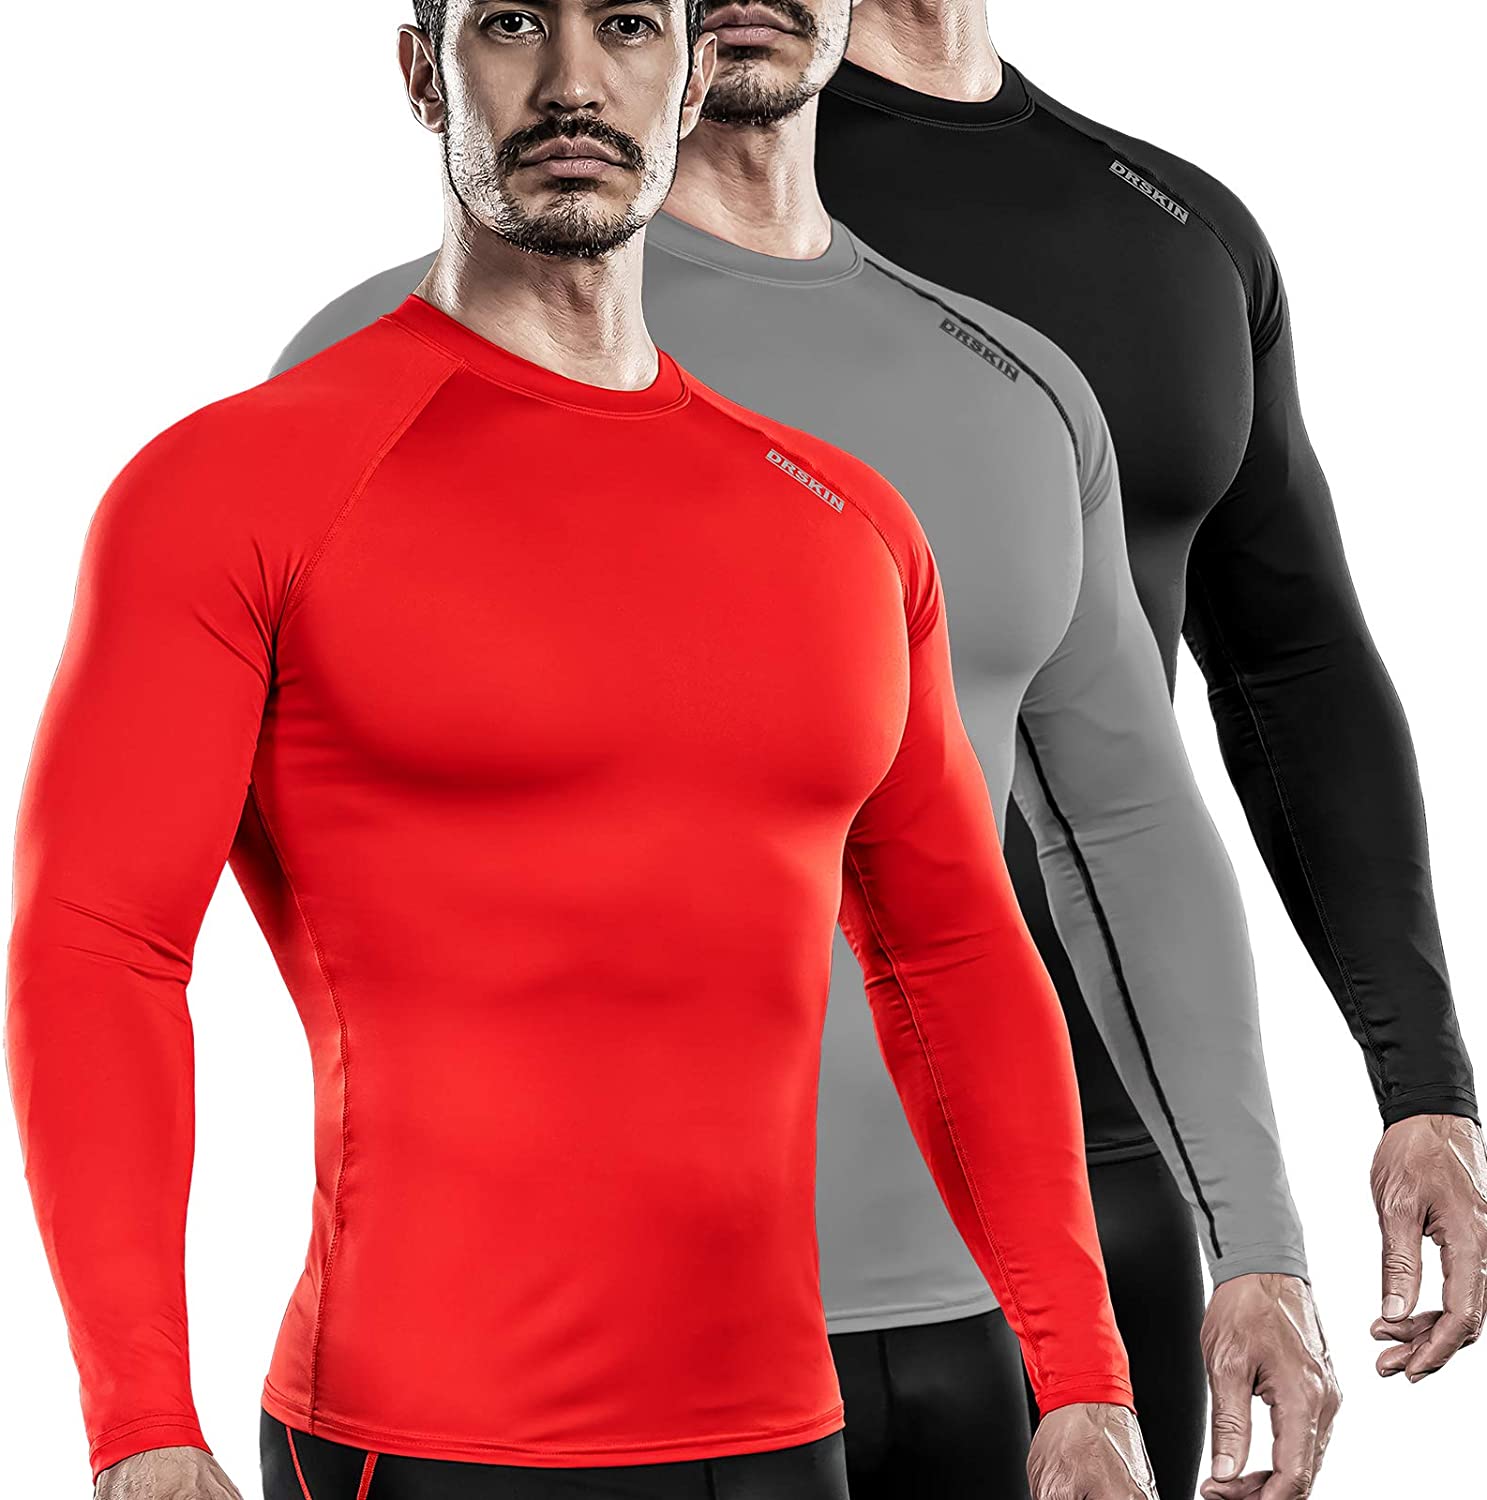 DRSKIN Men's Long Sleeve Compression Shirts Top Sports Workout Running Athletic